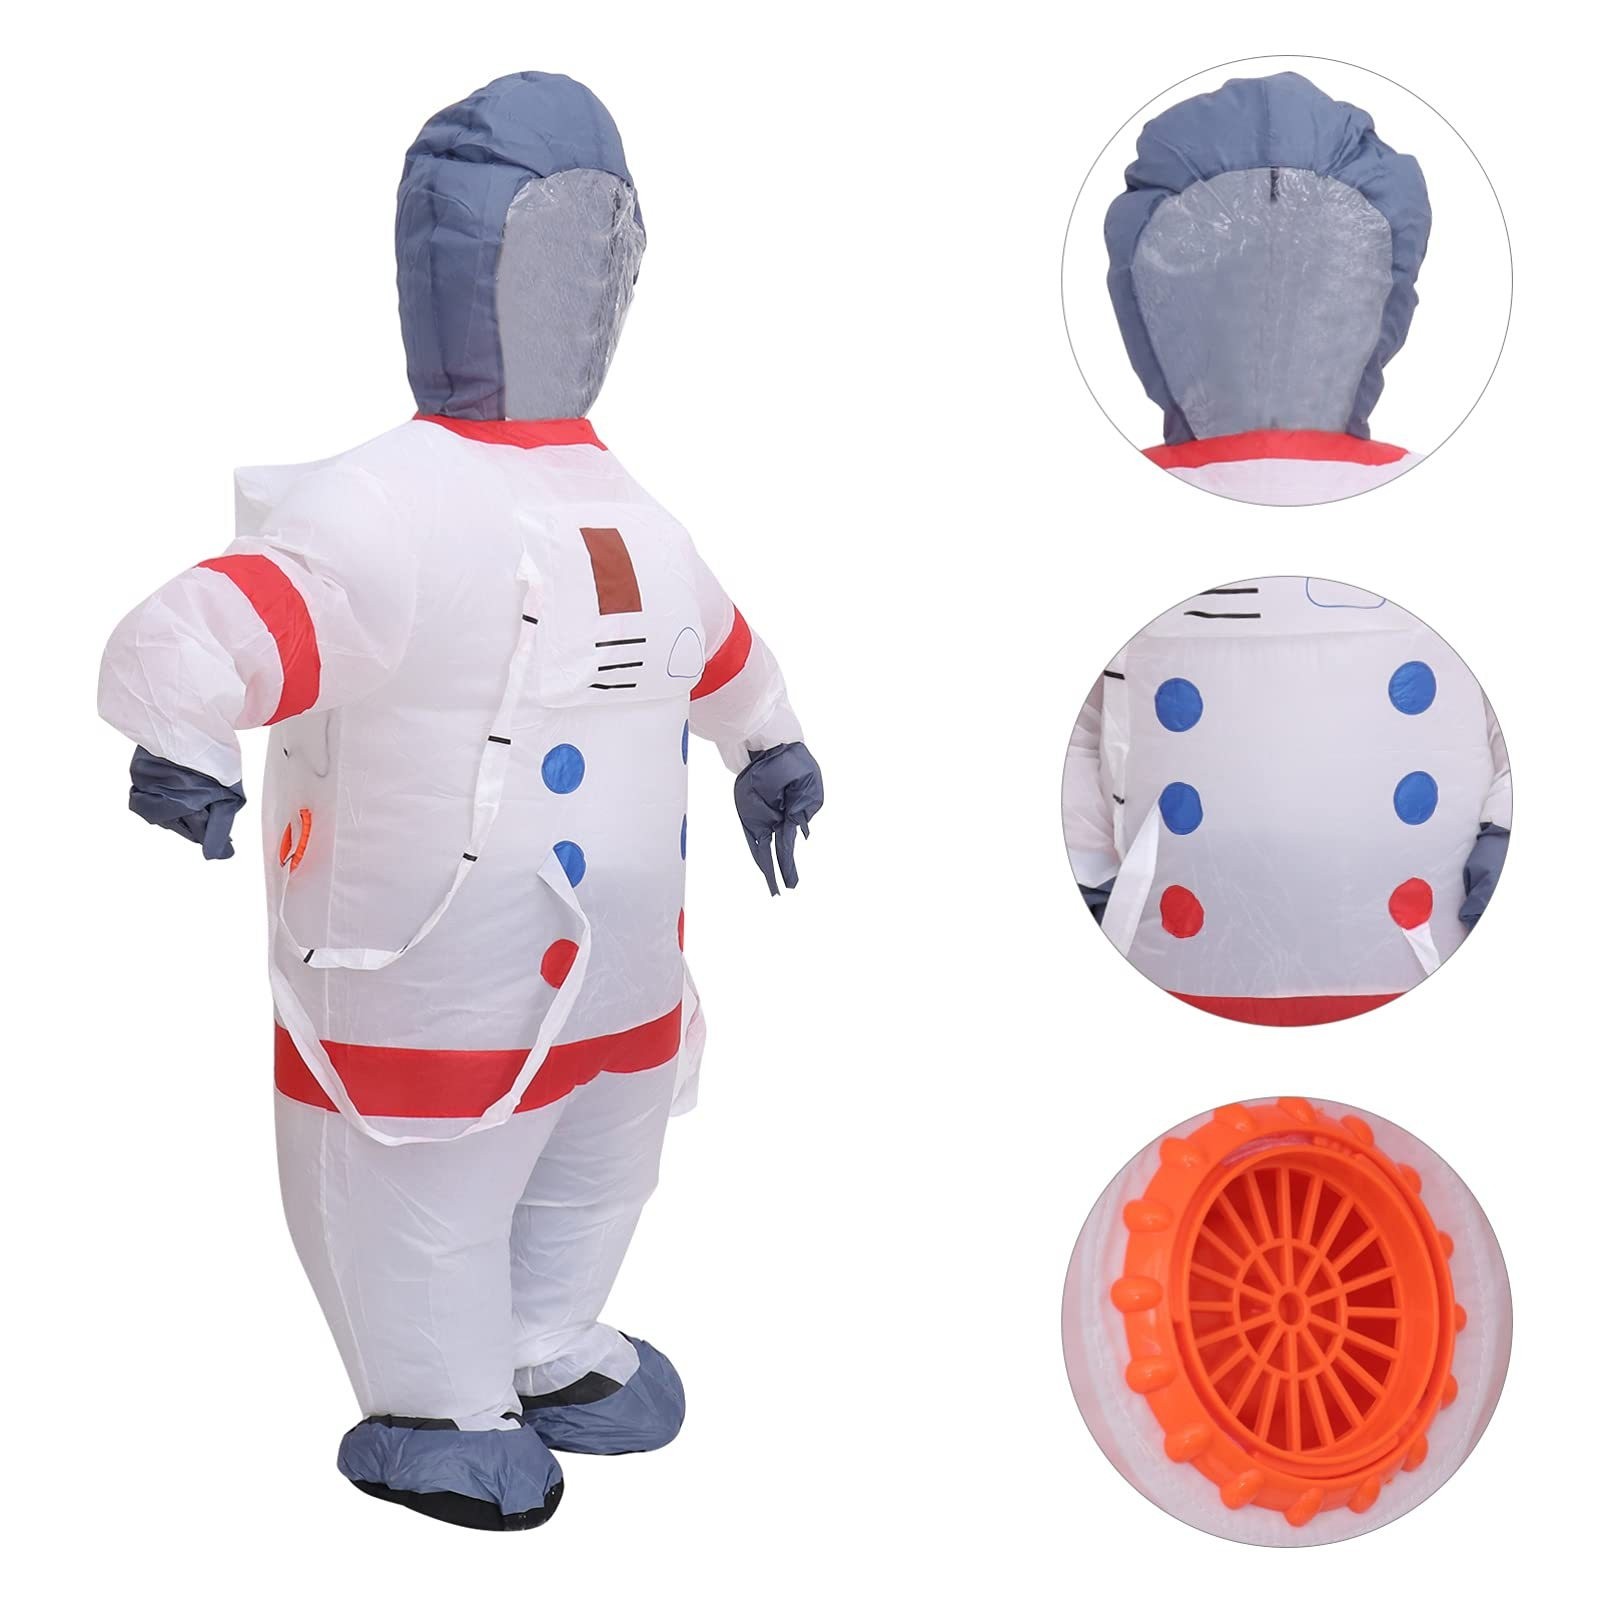 Inflatable Astronaut Costume Blow Up Halloween Party Outfit For Adult & Kids